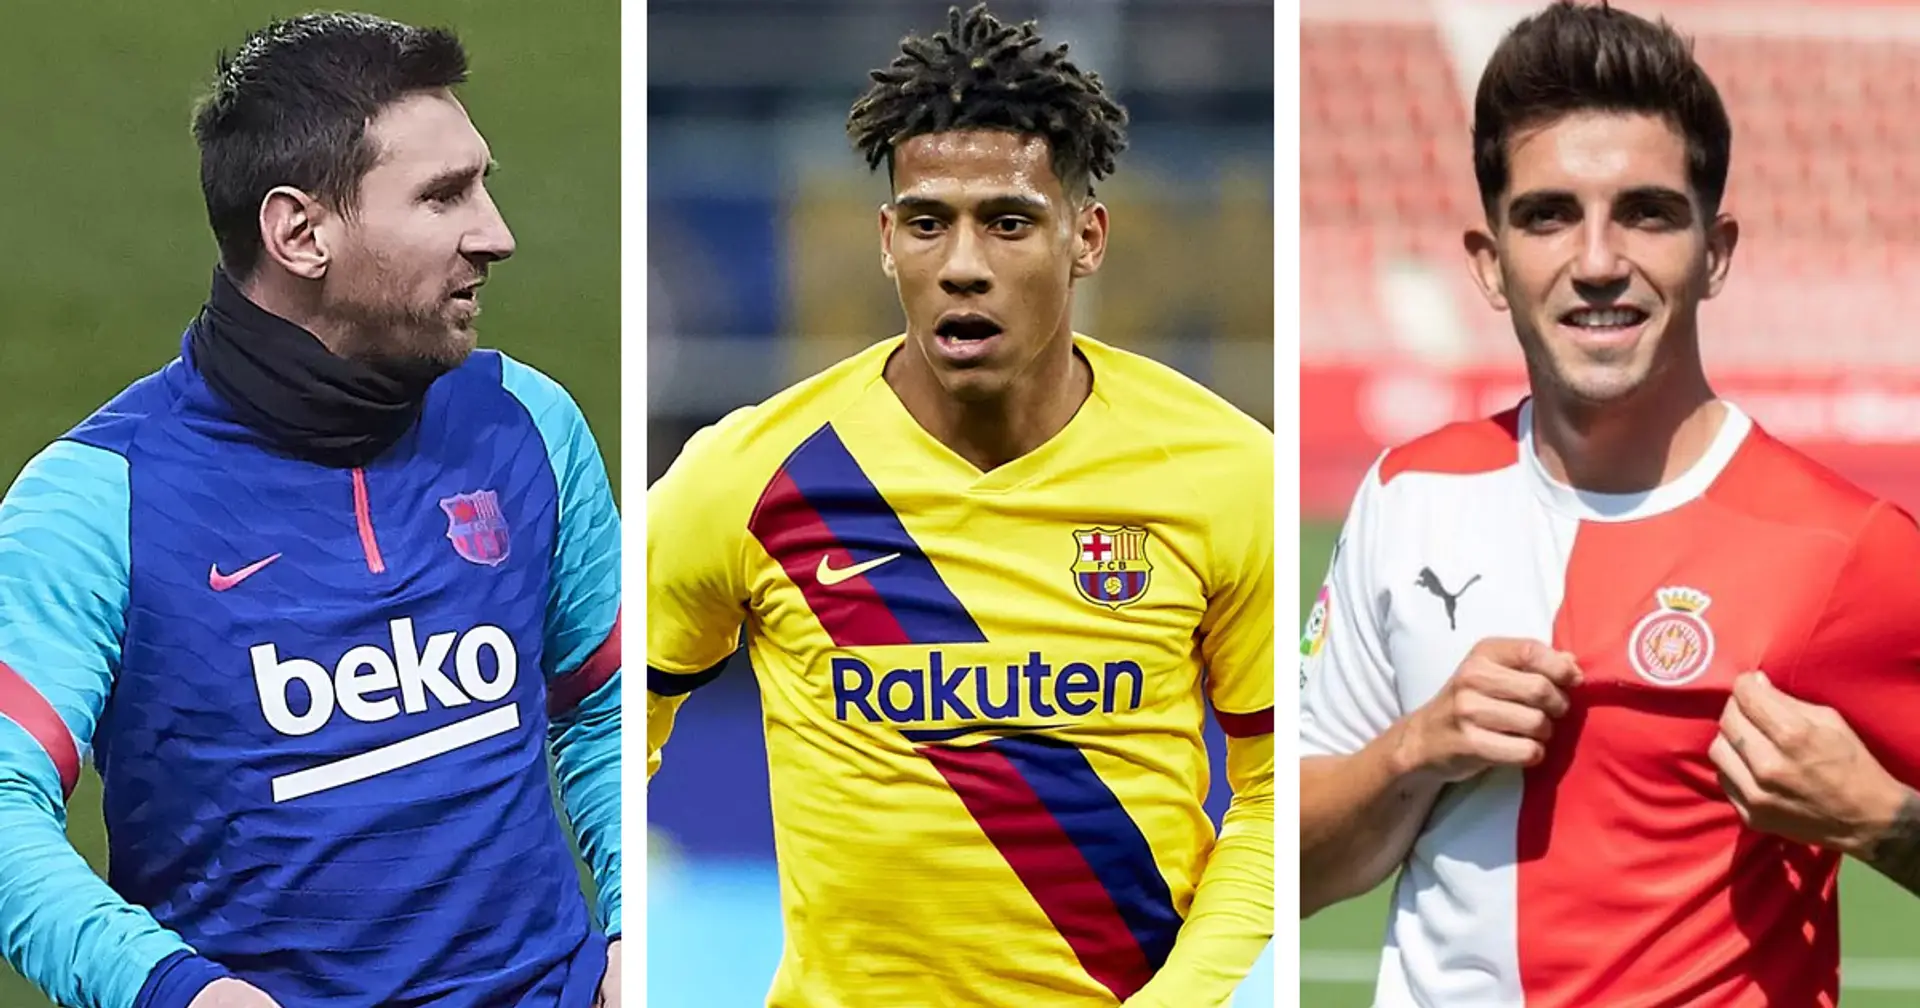 Transfer rumours, next fixtures, team news, rivals: Barcelona latest in 1 click